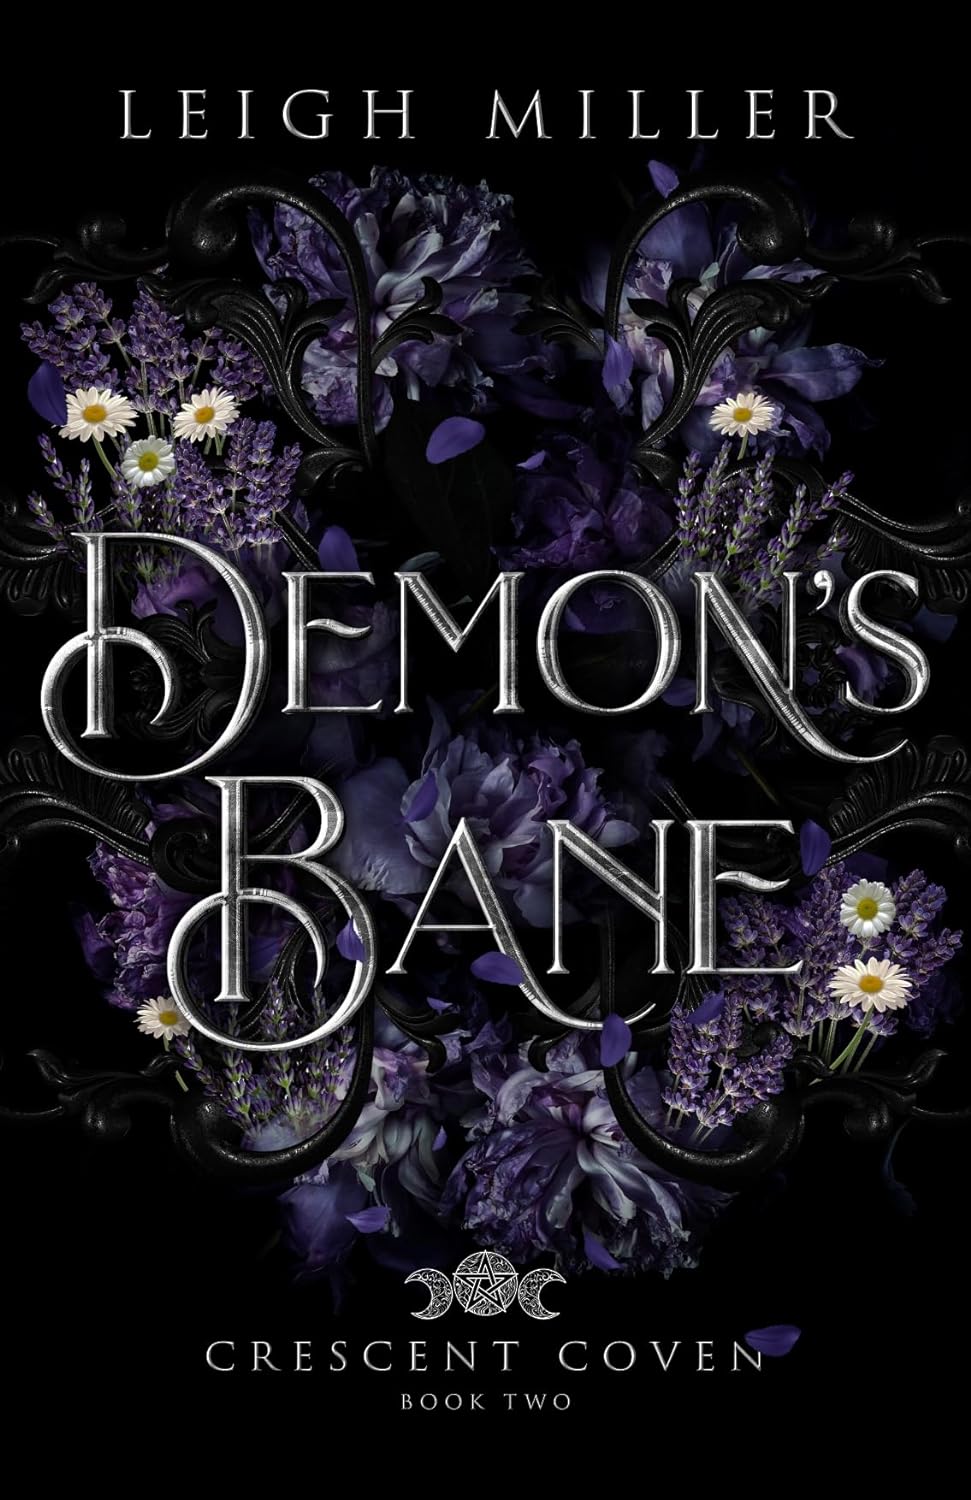 Demon’s Bane by Leigh Miller